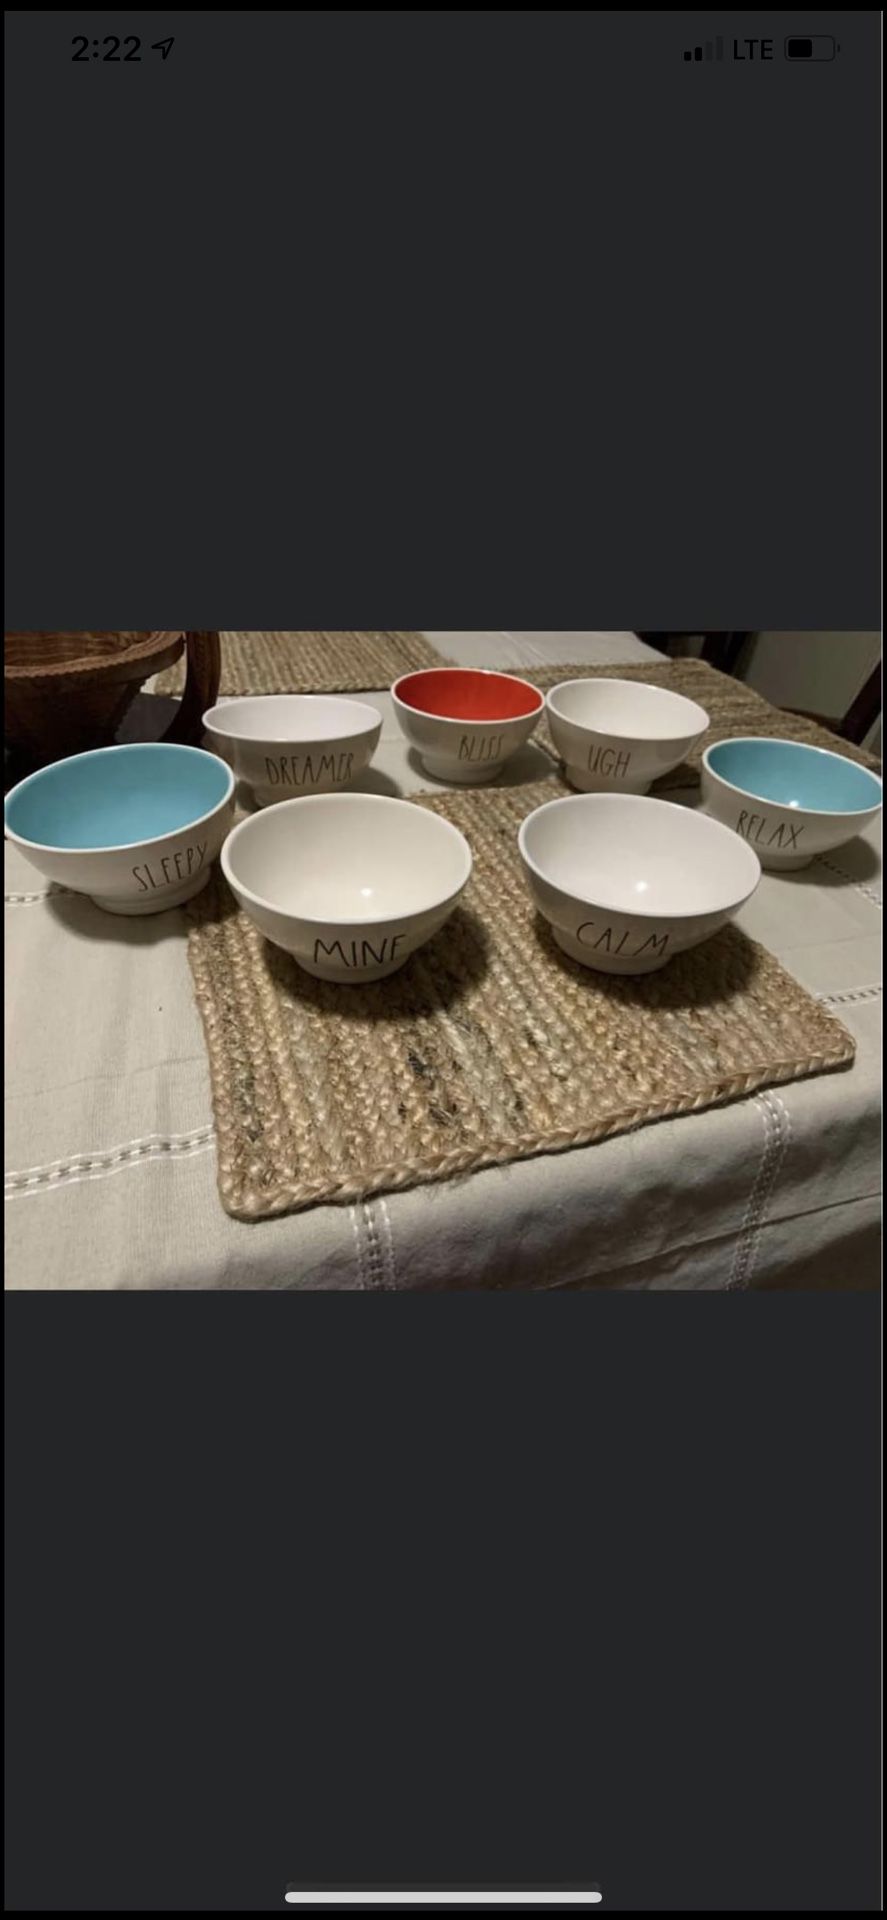 RAE DUNN BOWLS & MUGS (WILL NOT SEPARATE THEM, FIRM PRICE)